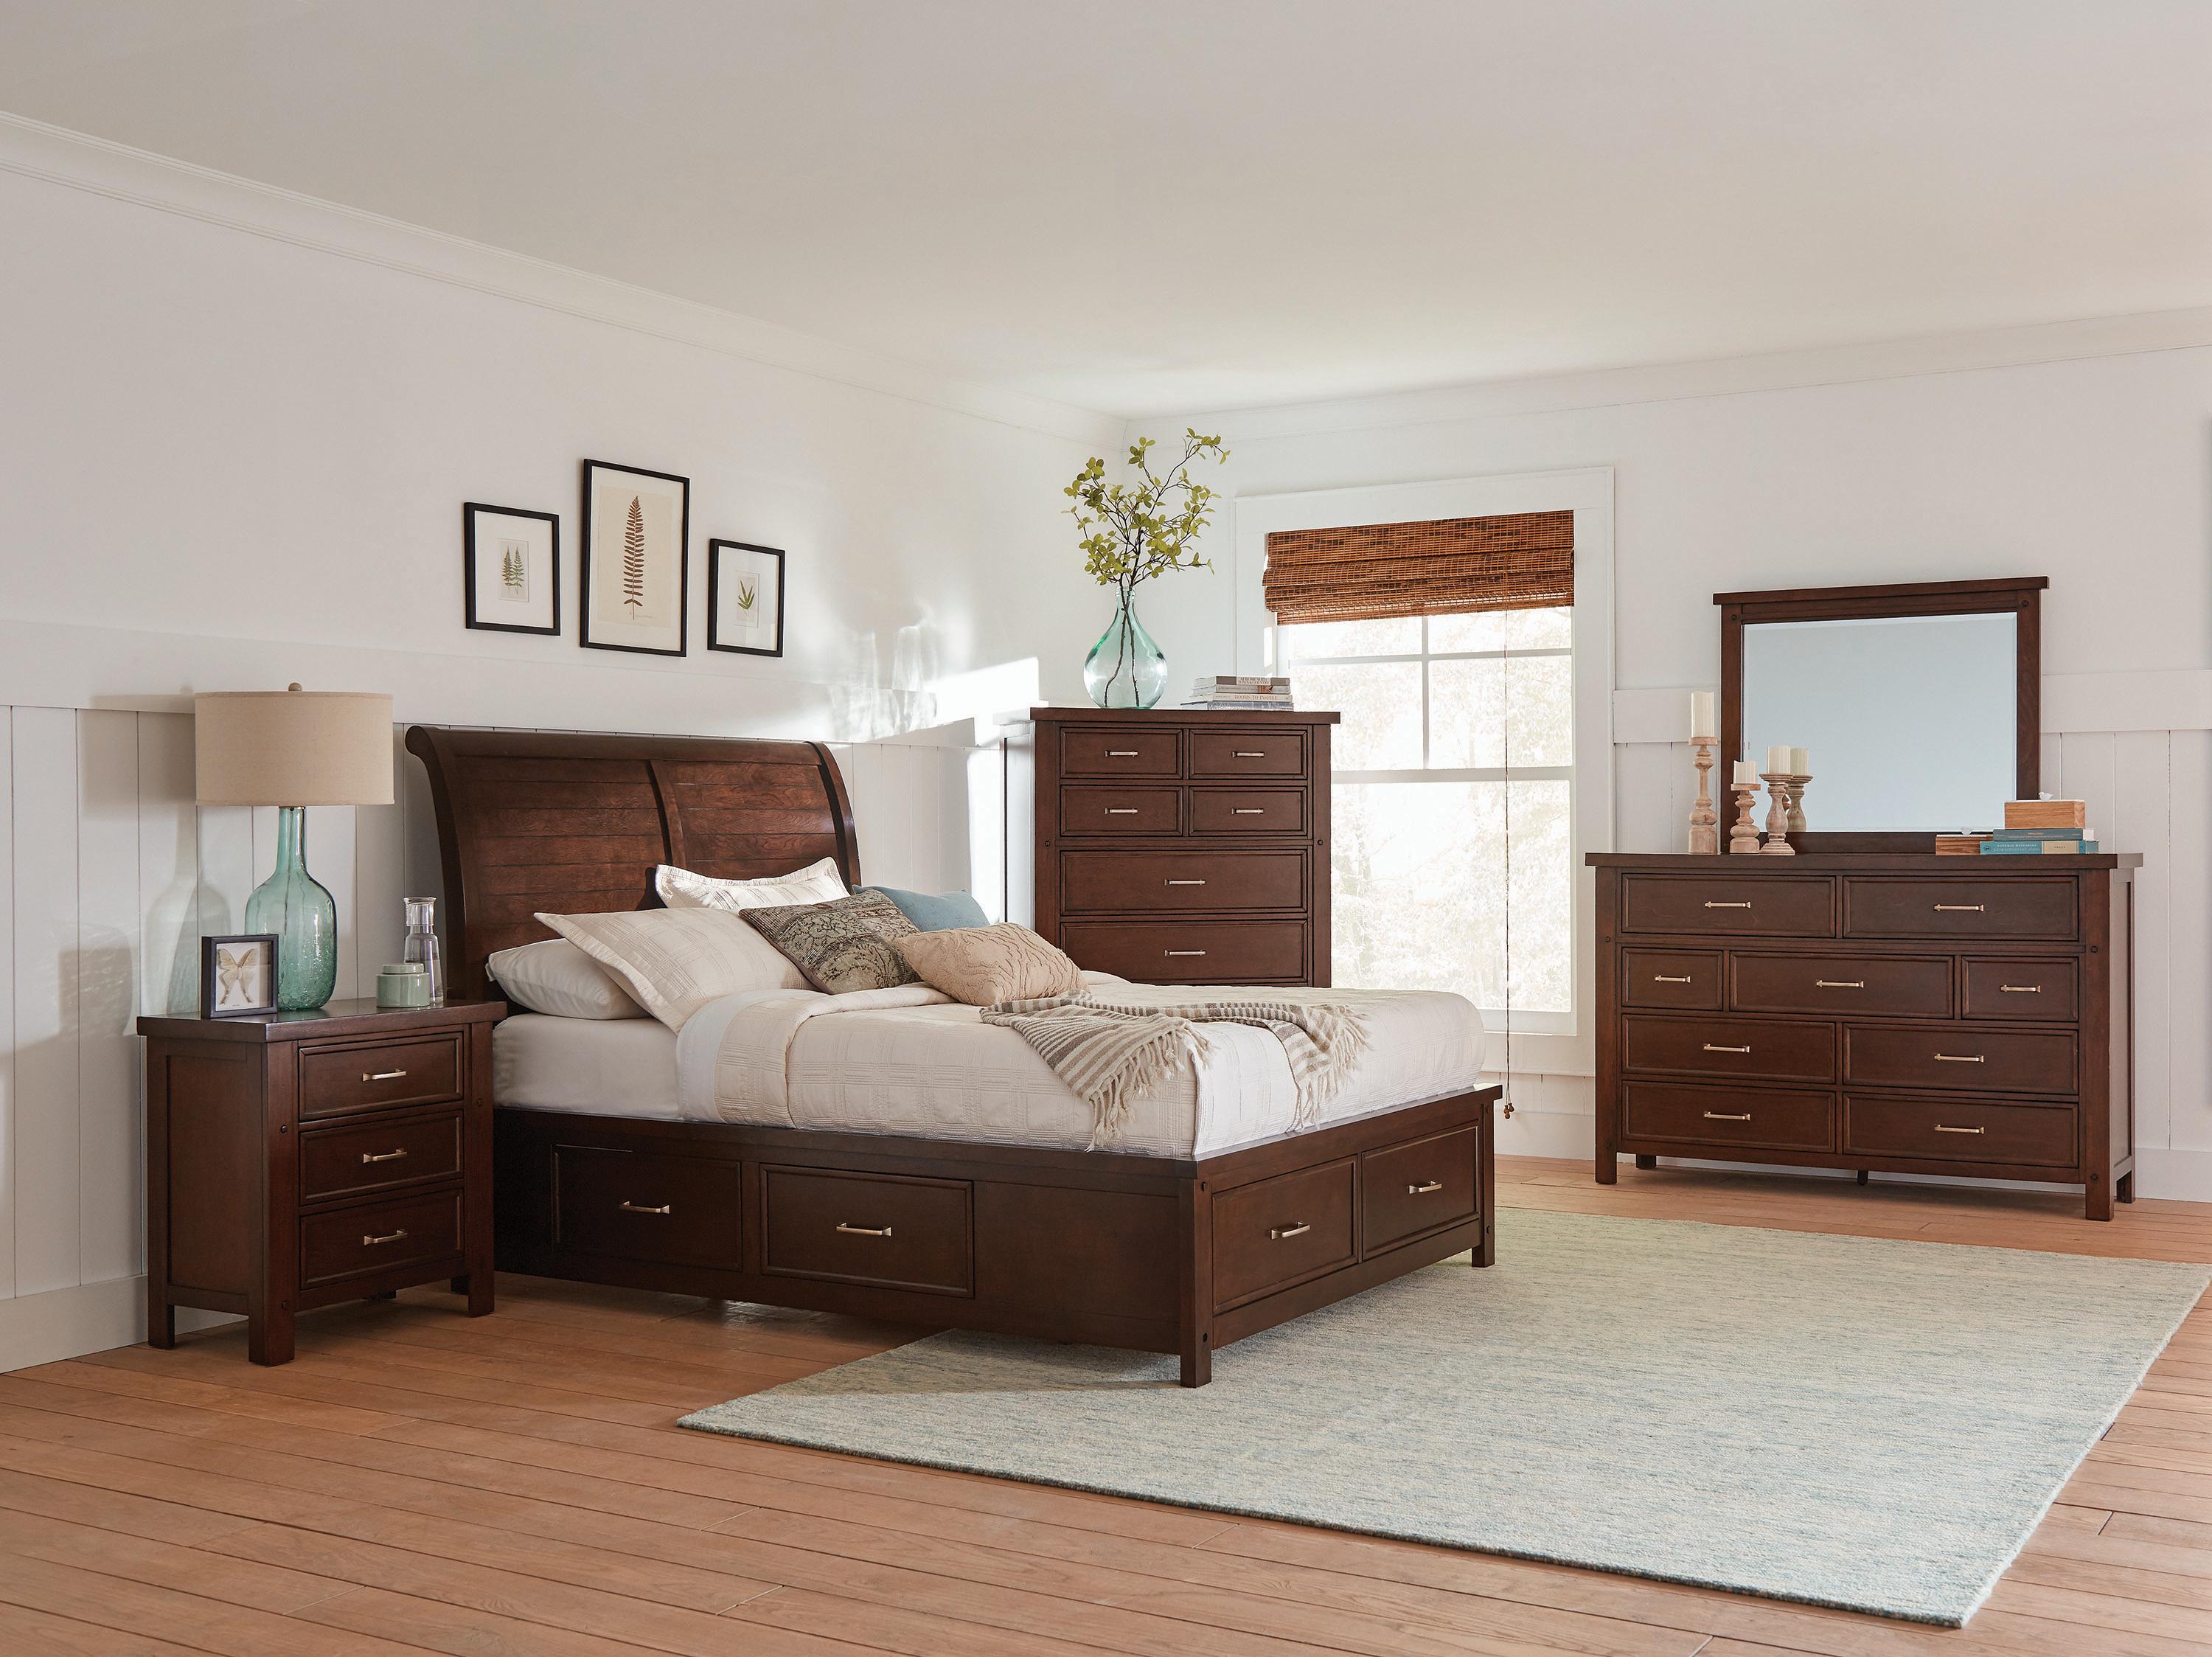 Transitional Bedroom Set 206430Q-6PC Barstow 206430Q-6PC in Dark Cherry 